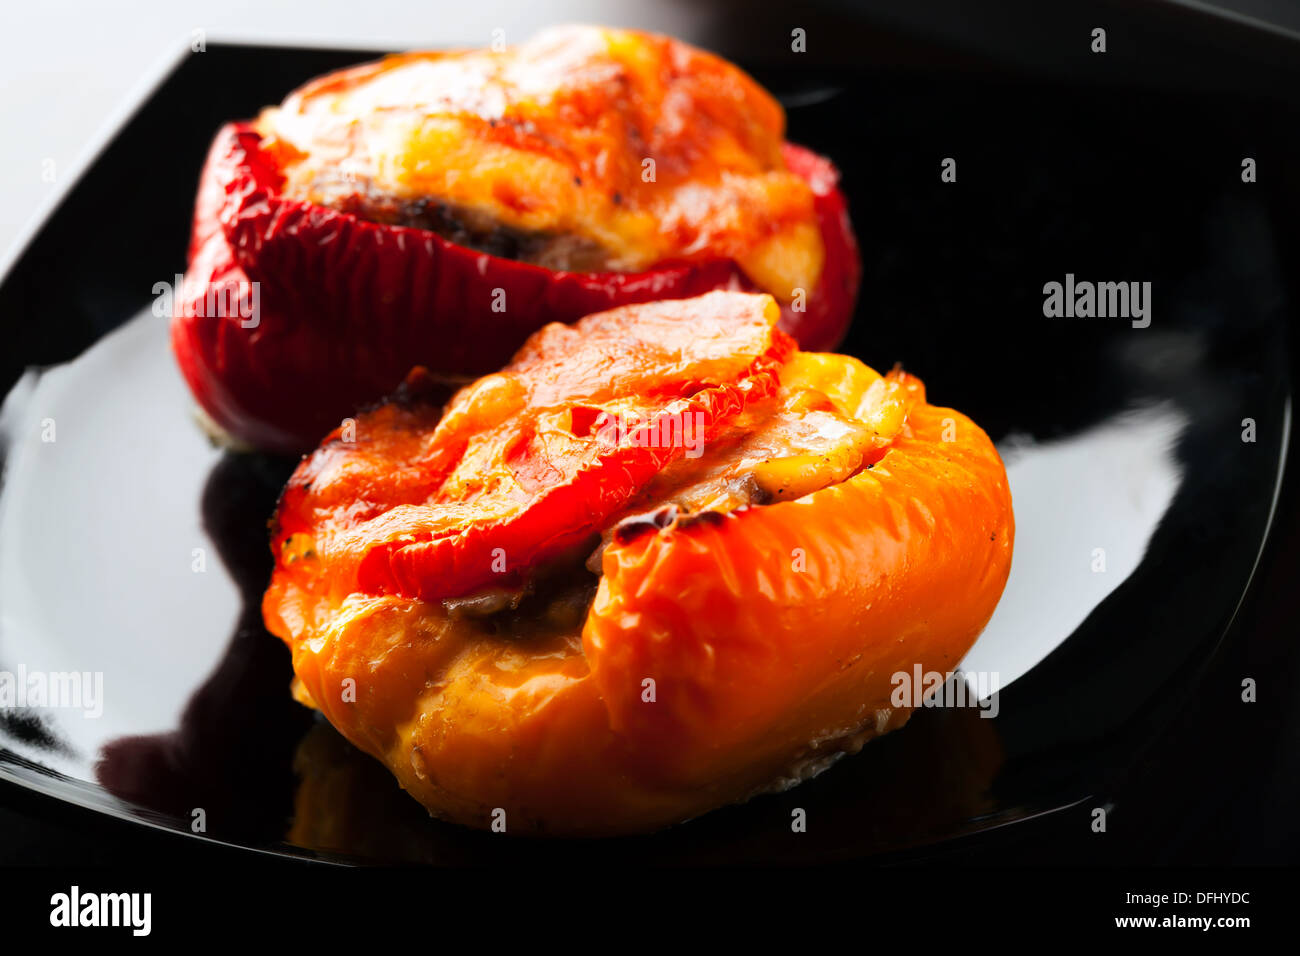 Stuffed bell peppers with chopped meat, cheese and tomato lay on black plate Stock Photo